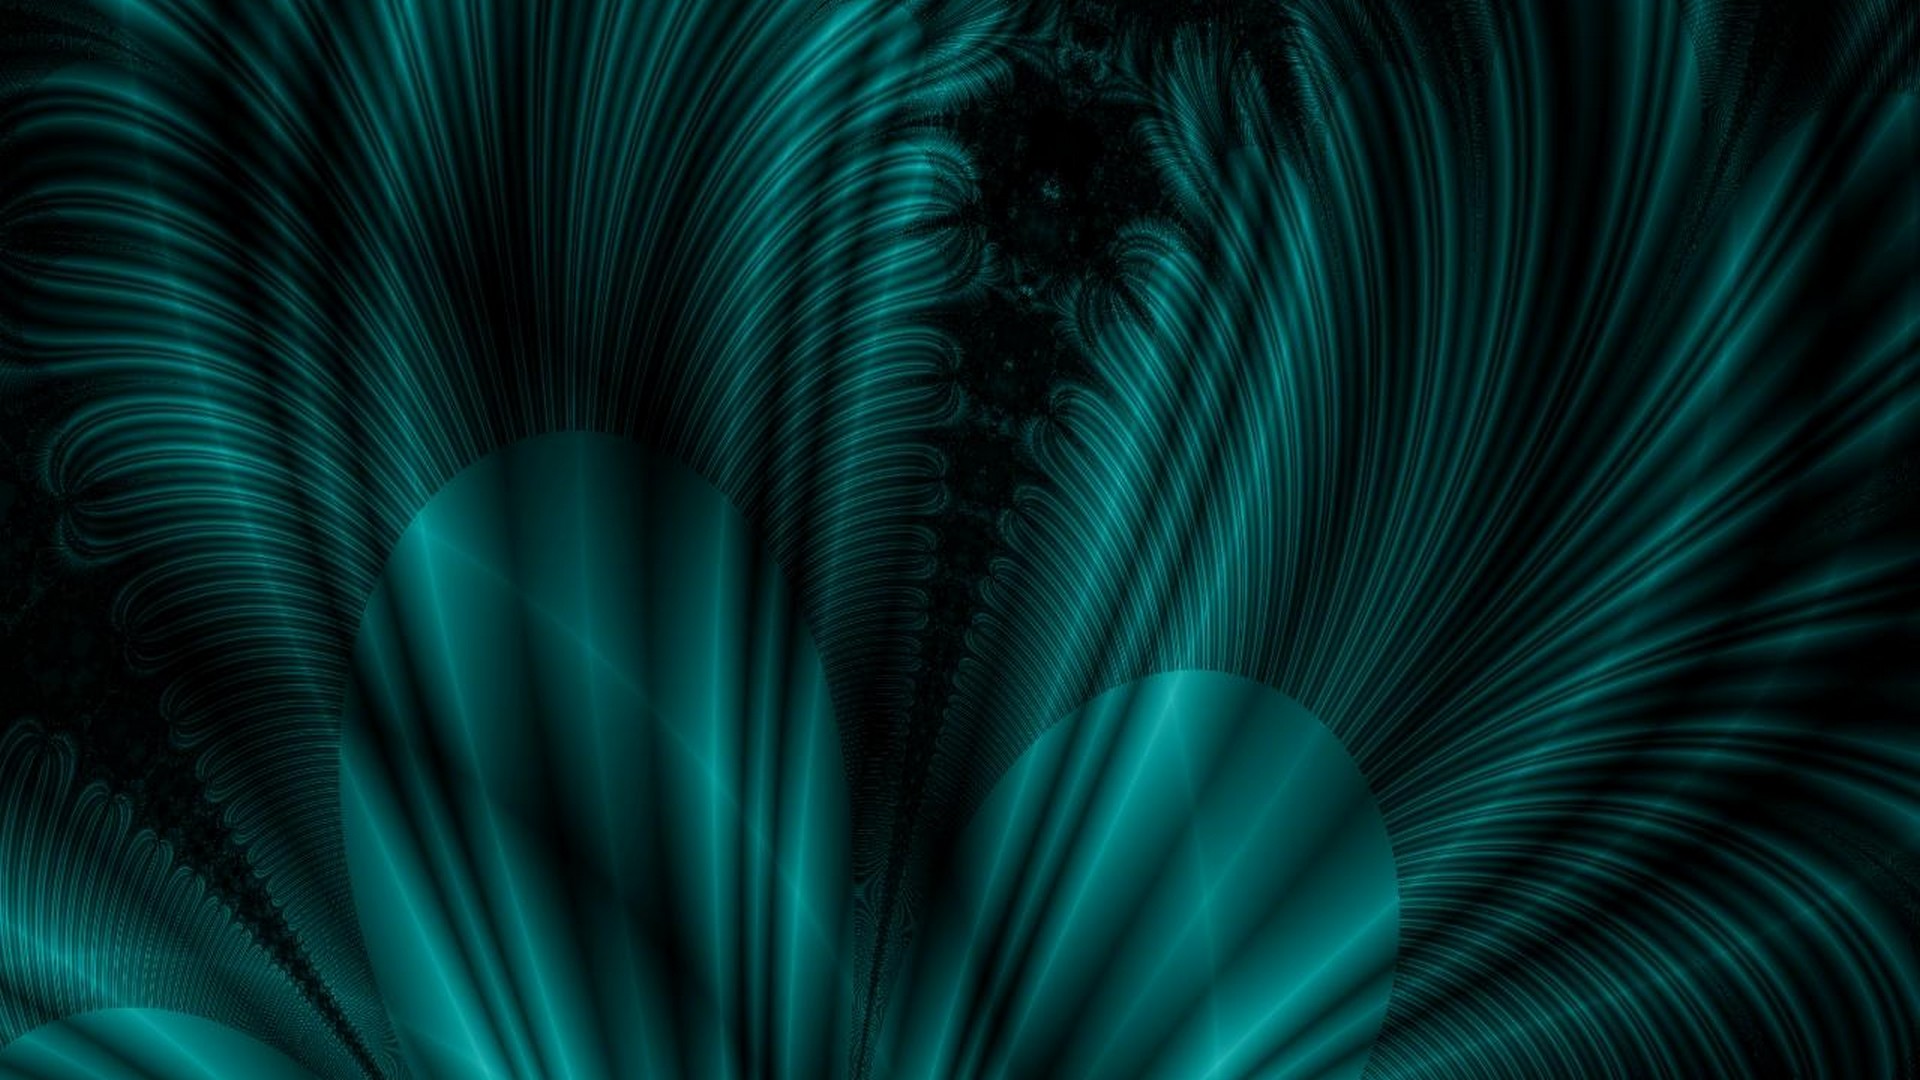 Dark Teal HD Wallpaper With Resolution 1920X1080 pixel. You can make this wallpaper for your Desktop Computer Backgrounds, Mac Wallpapers, Android Lock screen or iPhone Screensavers